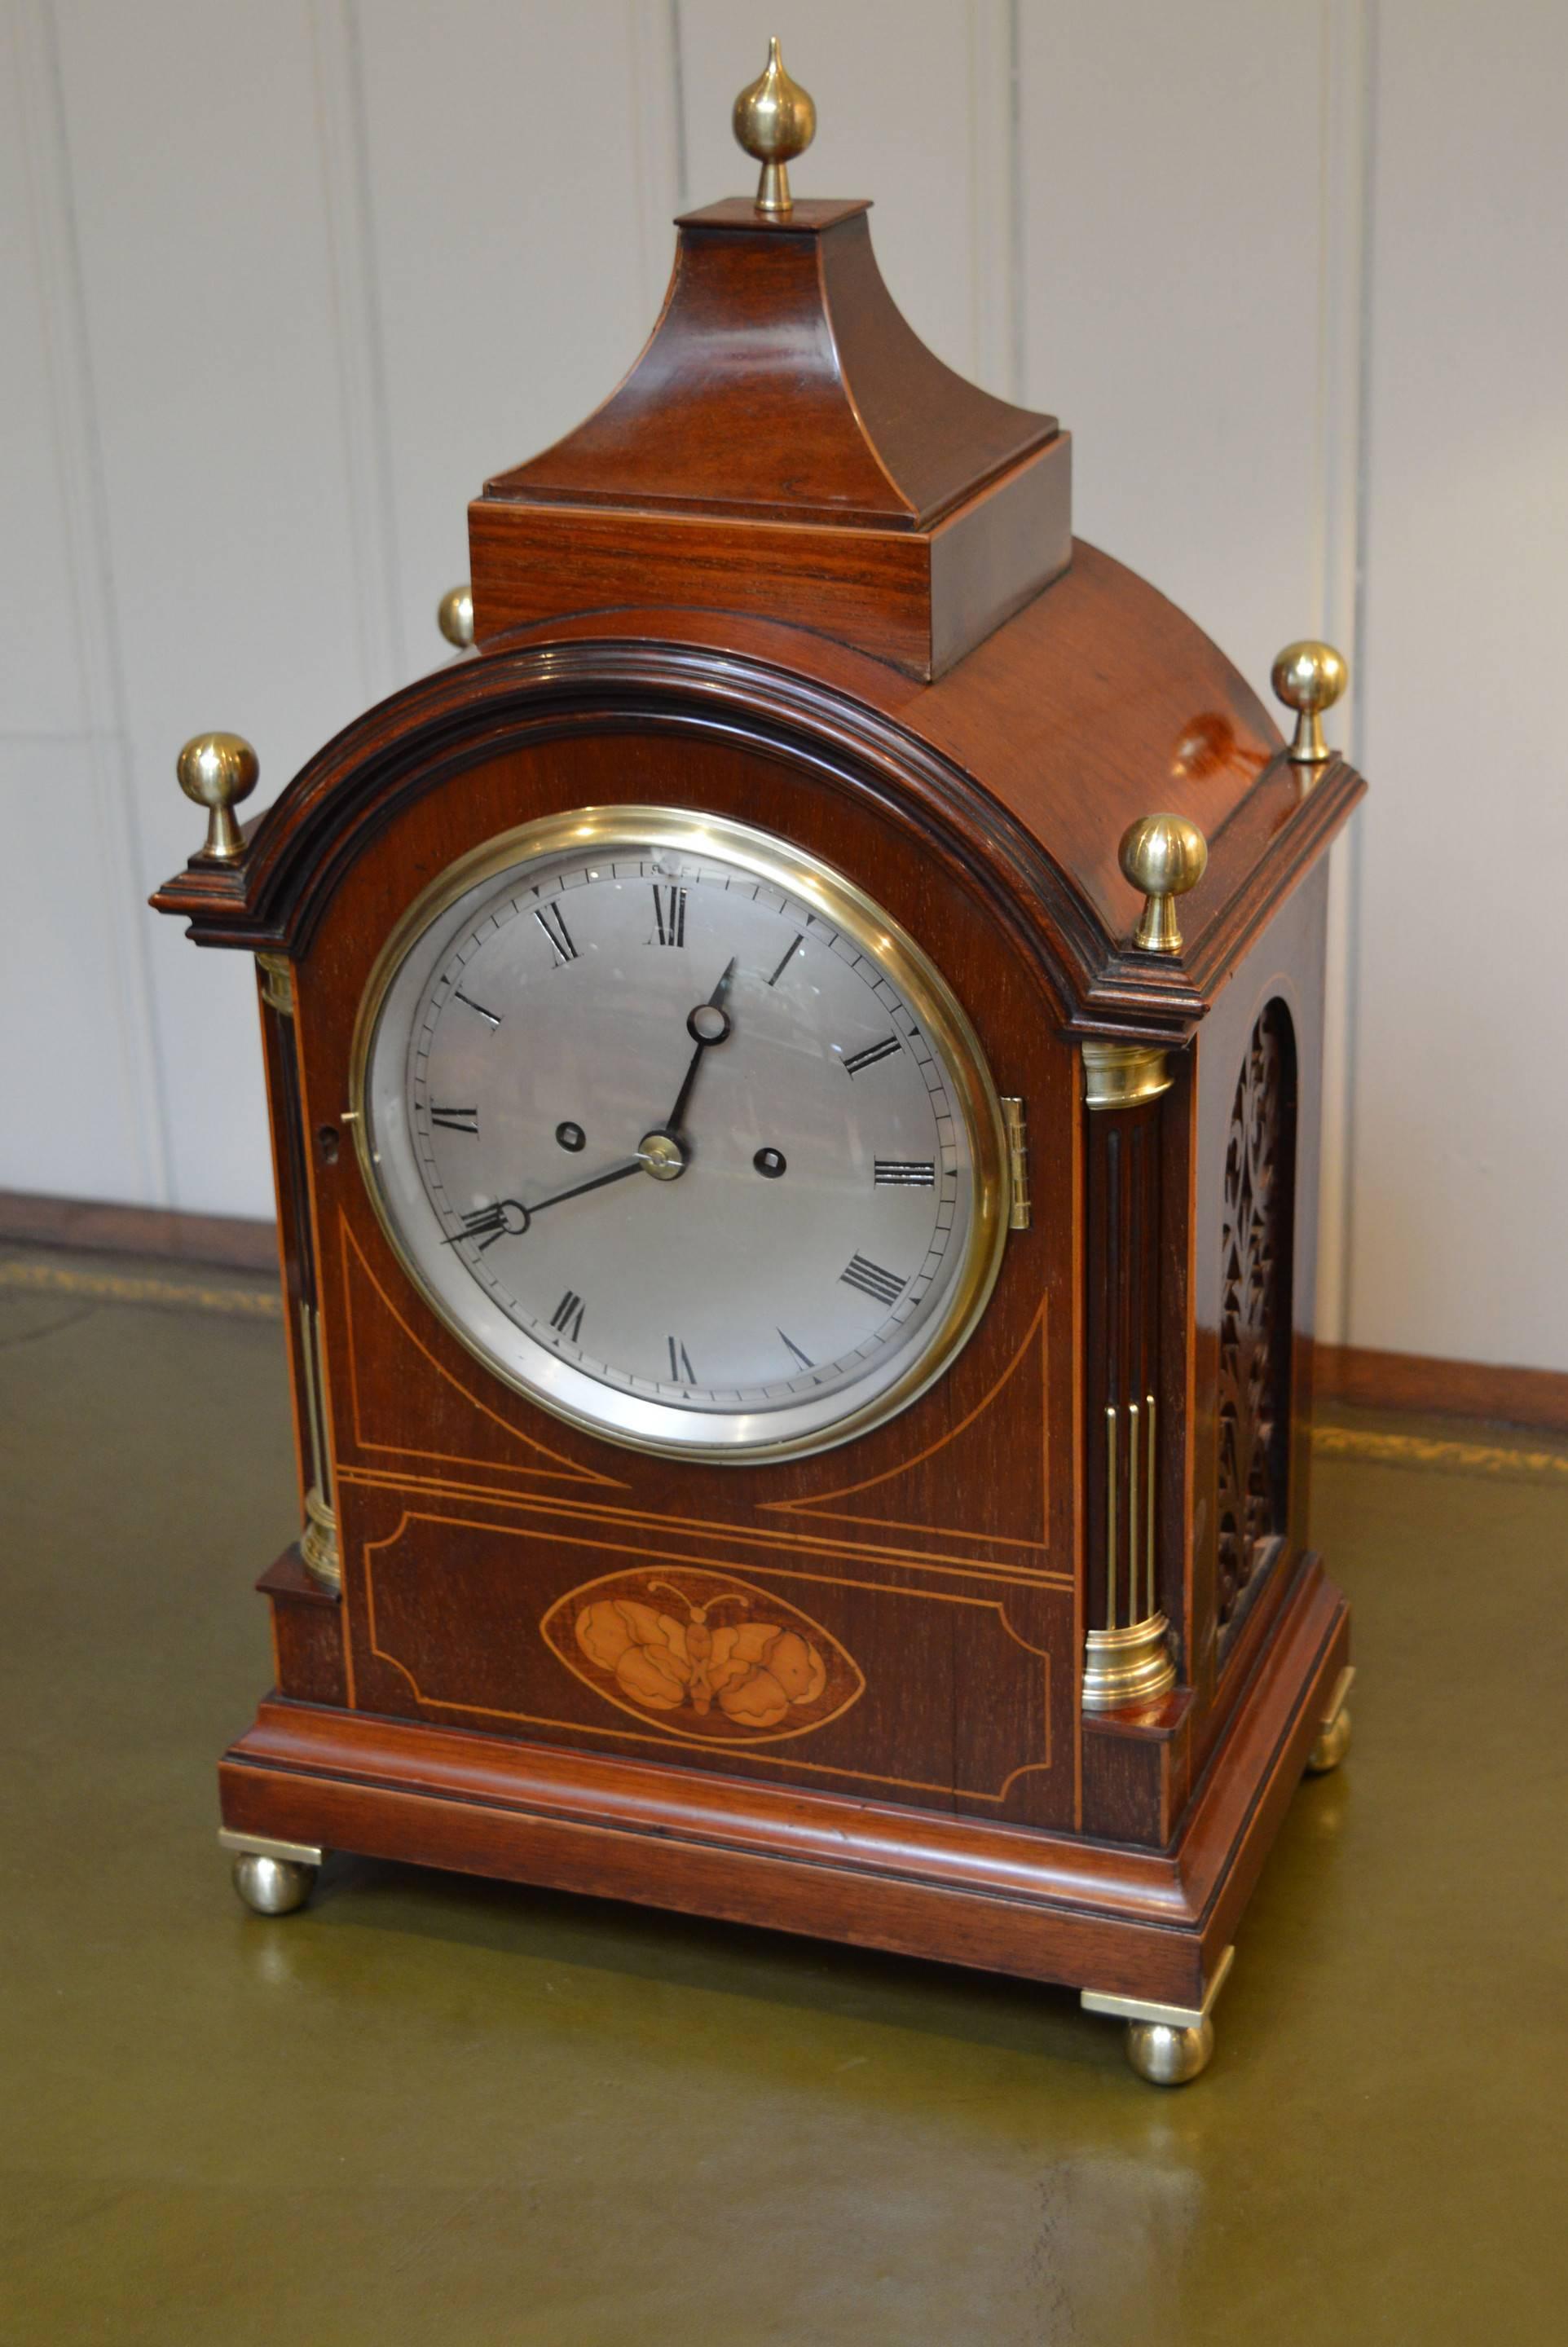 A substantial, good quality, classical English bracket clock dating to the end of the 19th century. It has a pagoda top with a brass finial, mounted on a break arch case, with quartered corner pillars, all with boxwood stringing and a central